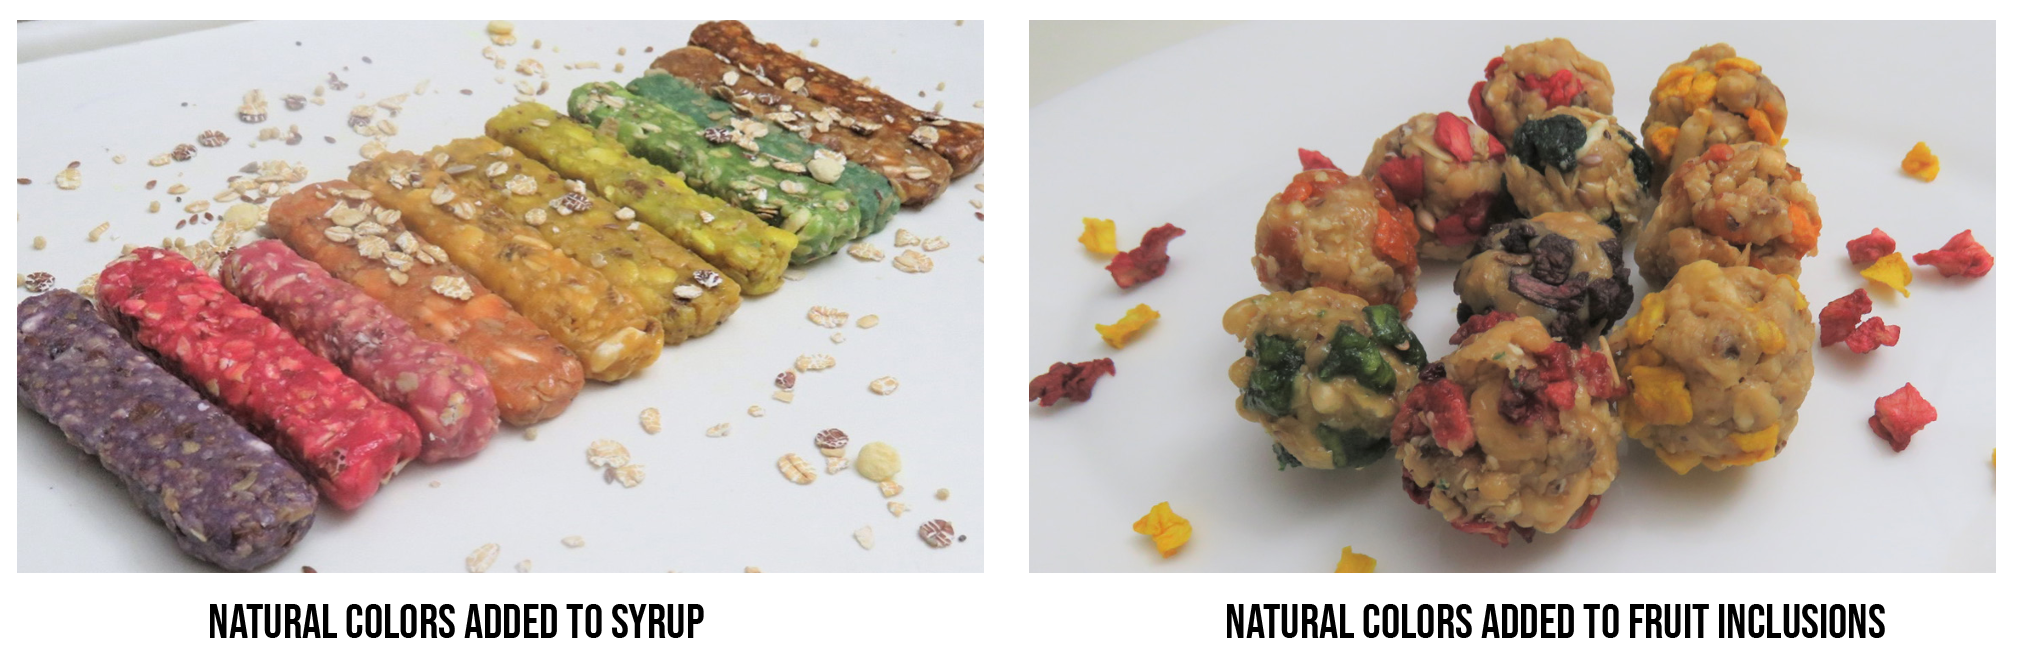 Natural colors added to granola bars in two different ways